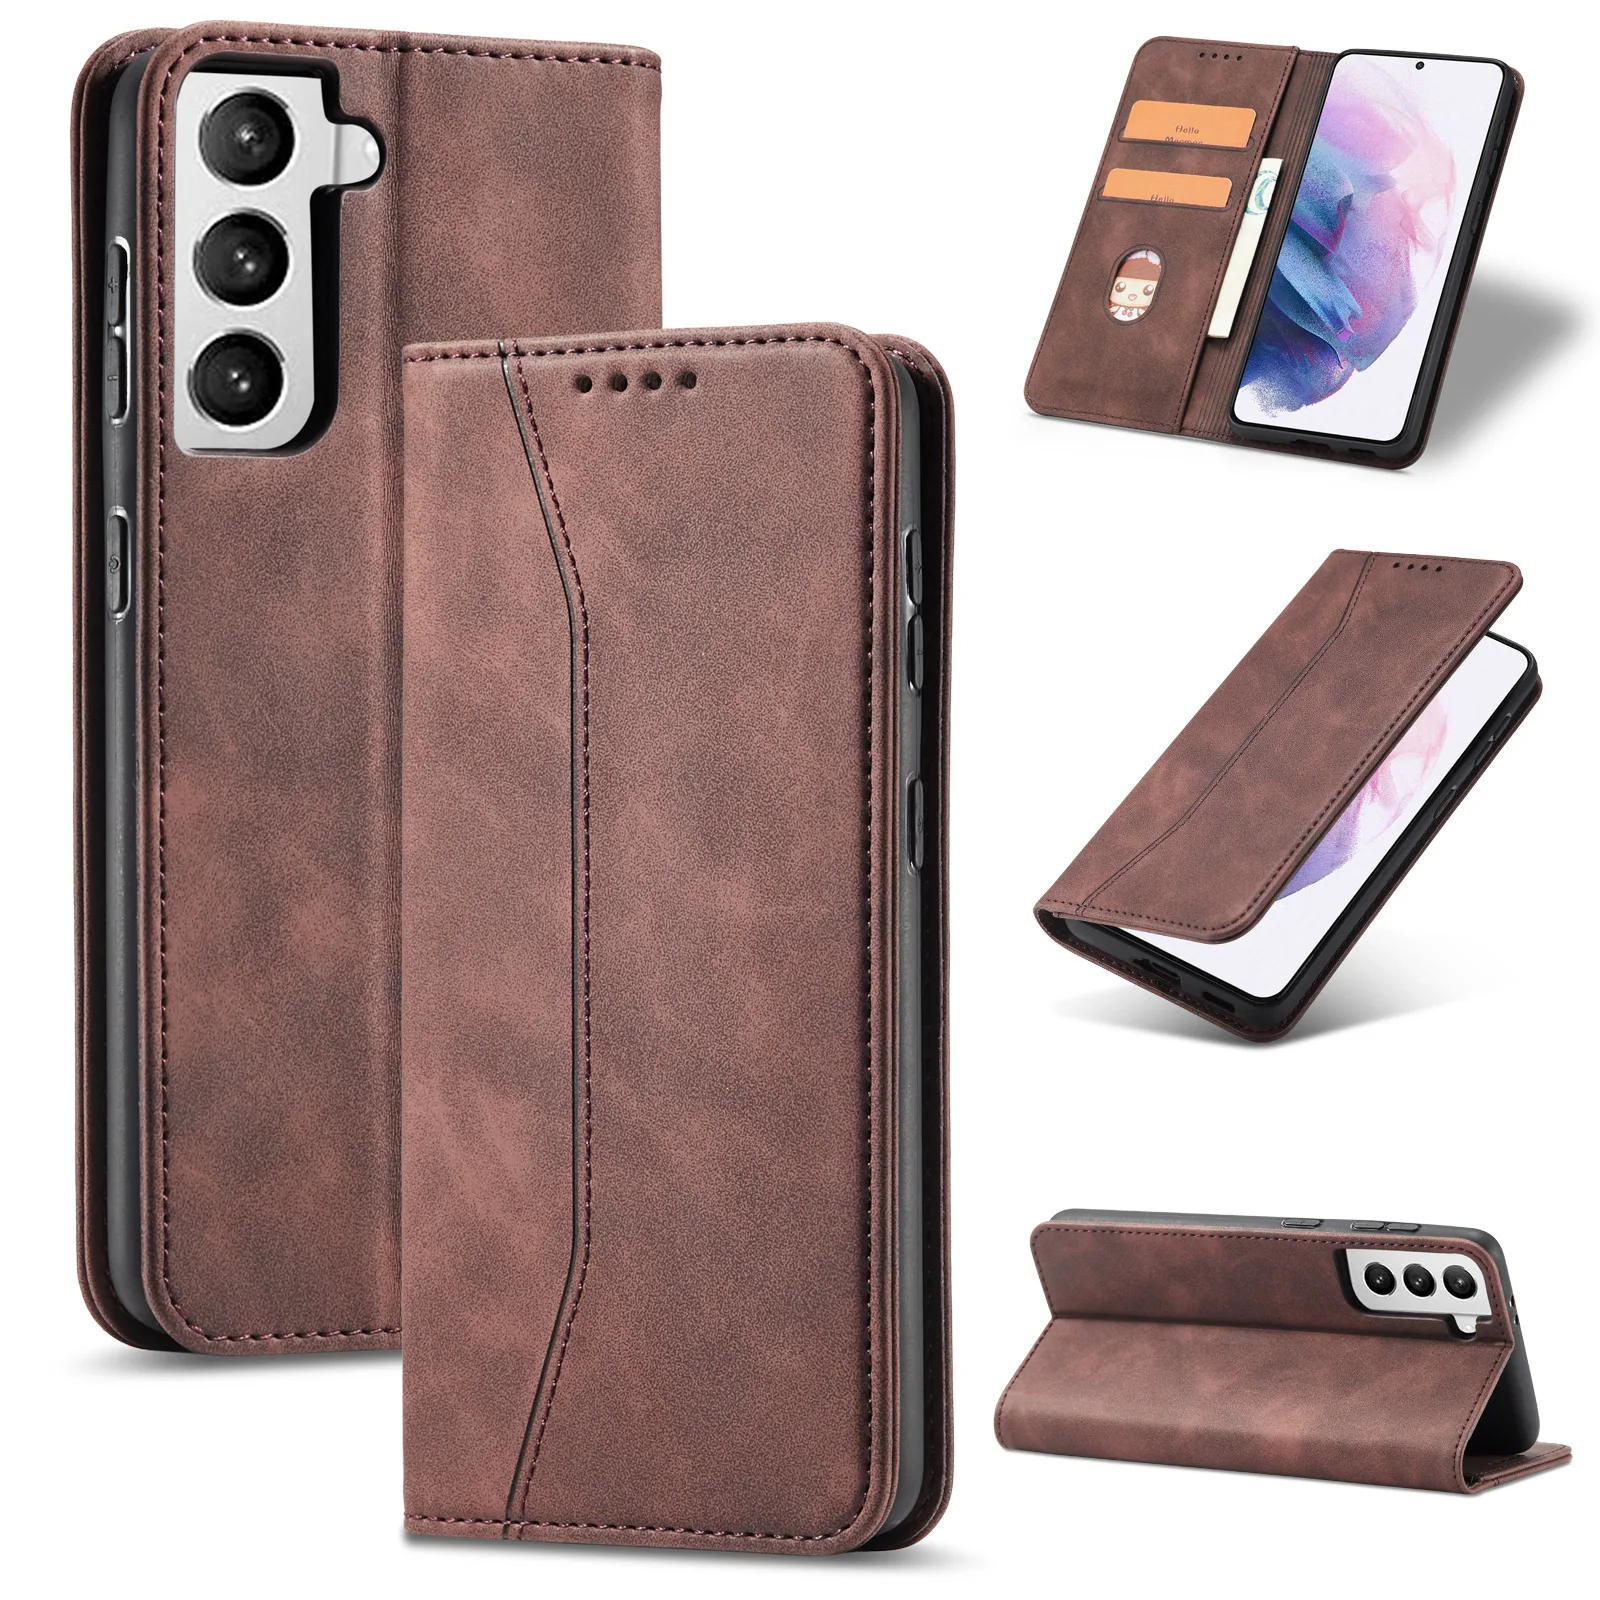 

Leather Case For Samsung Galaxy S22 S20 S21 S10 S9 Plus FE Ultra A12 A32 A52 A72 A50 Flip Wallet Book Cover Phone Bags Cover, 5 colors